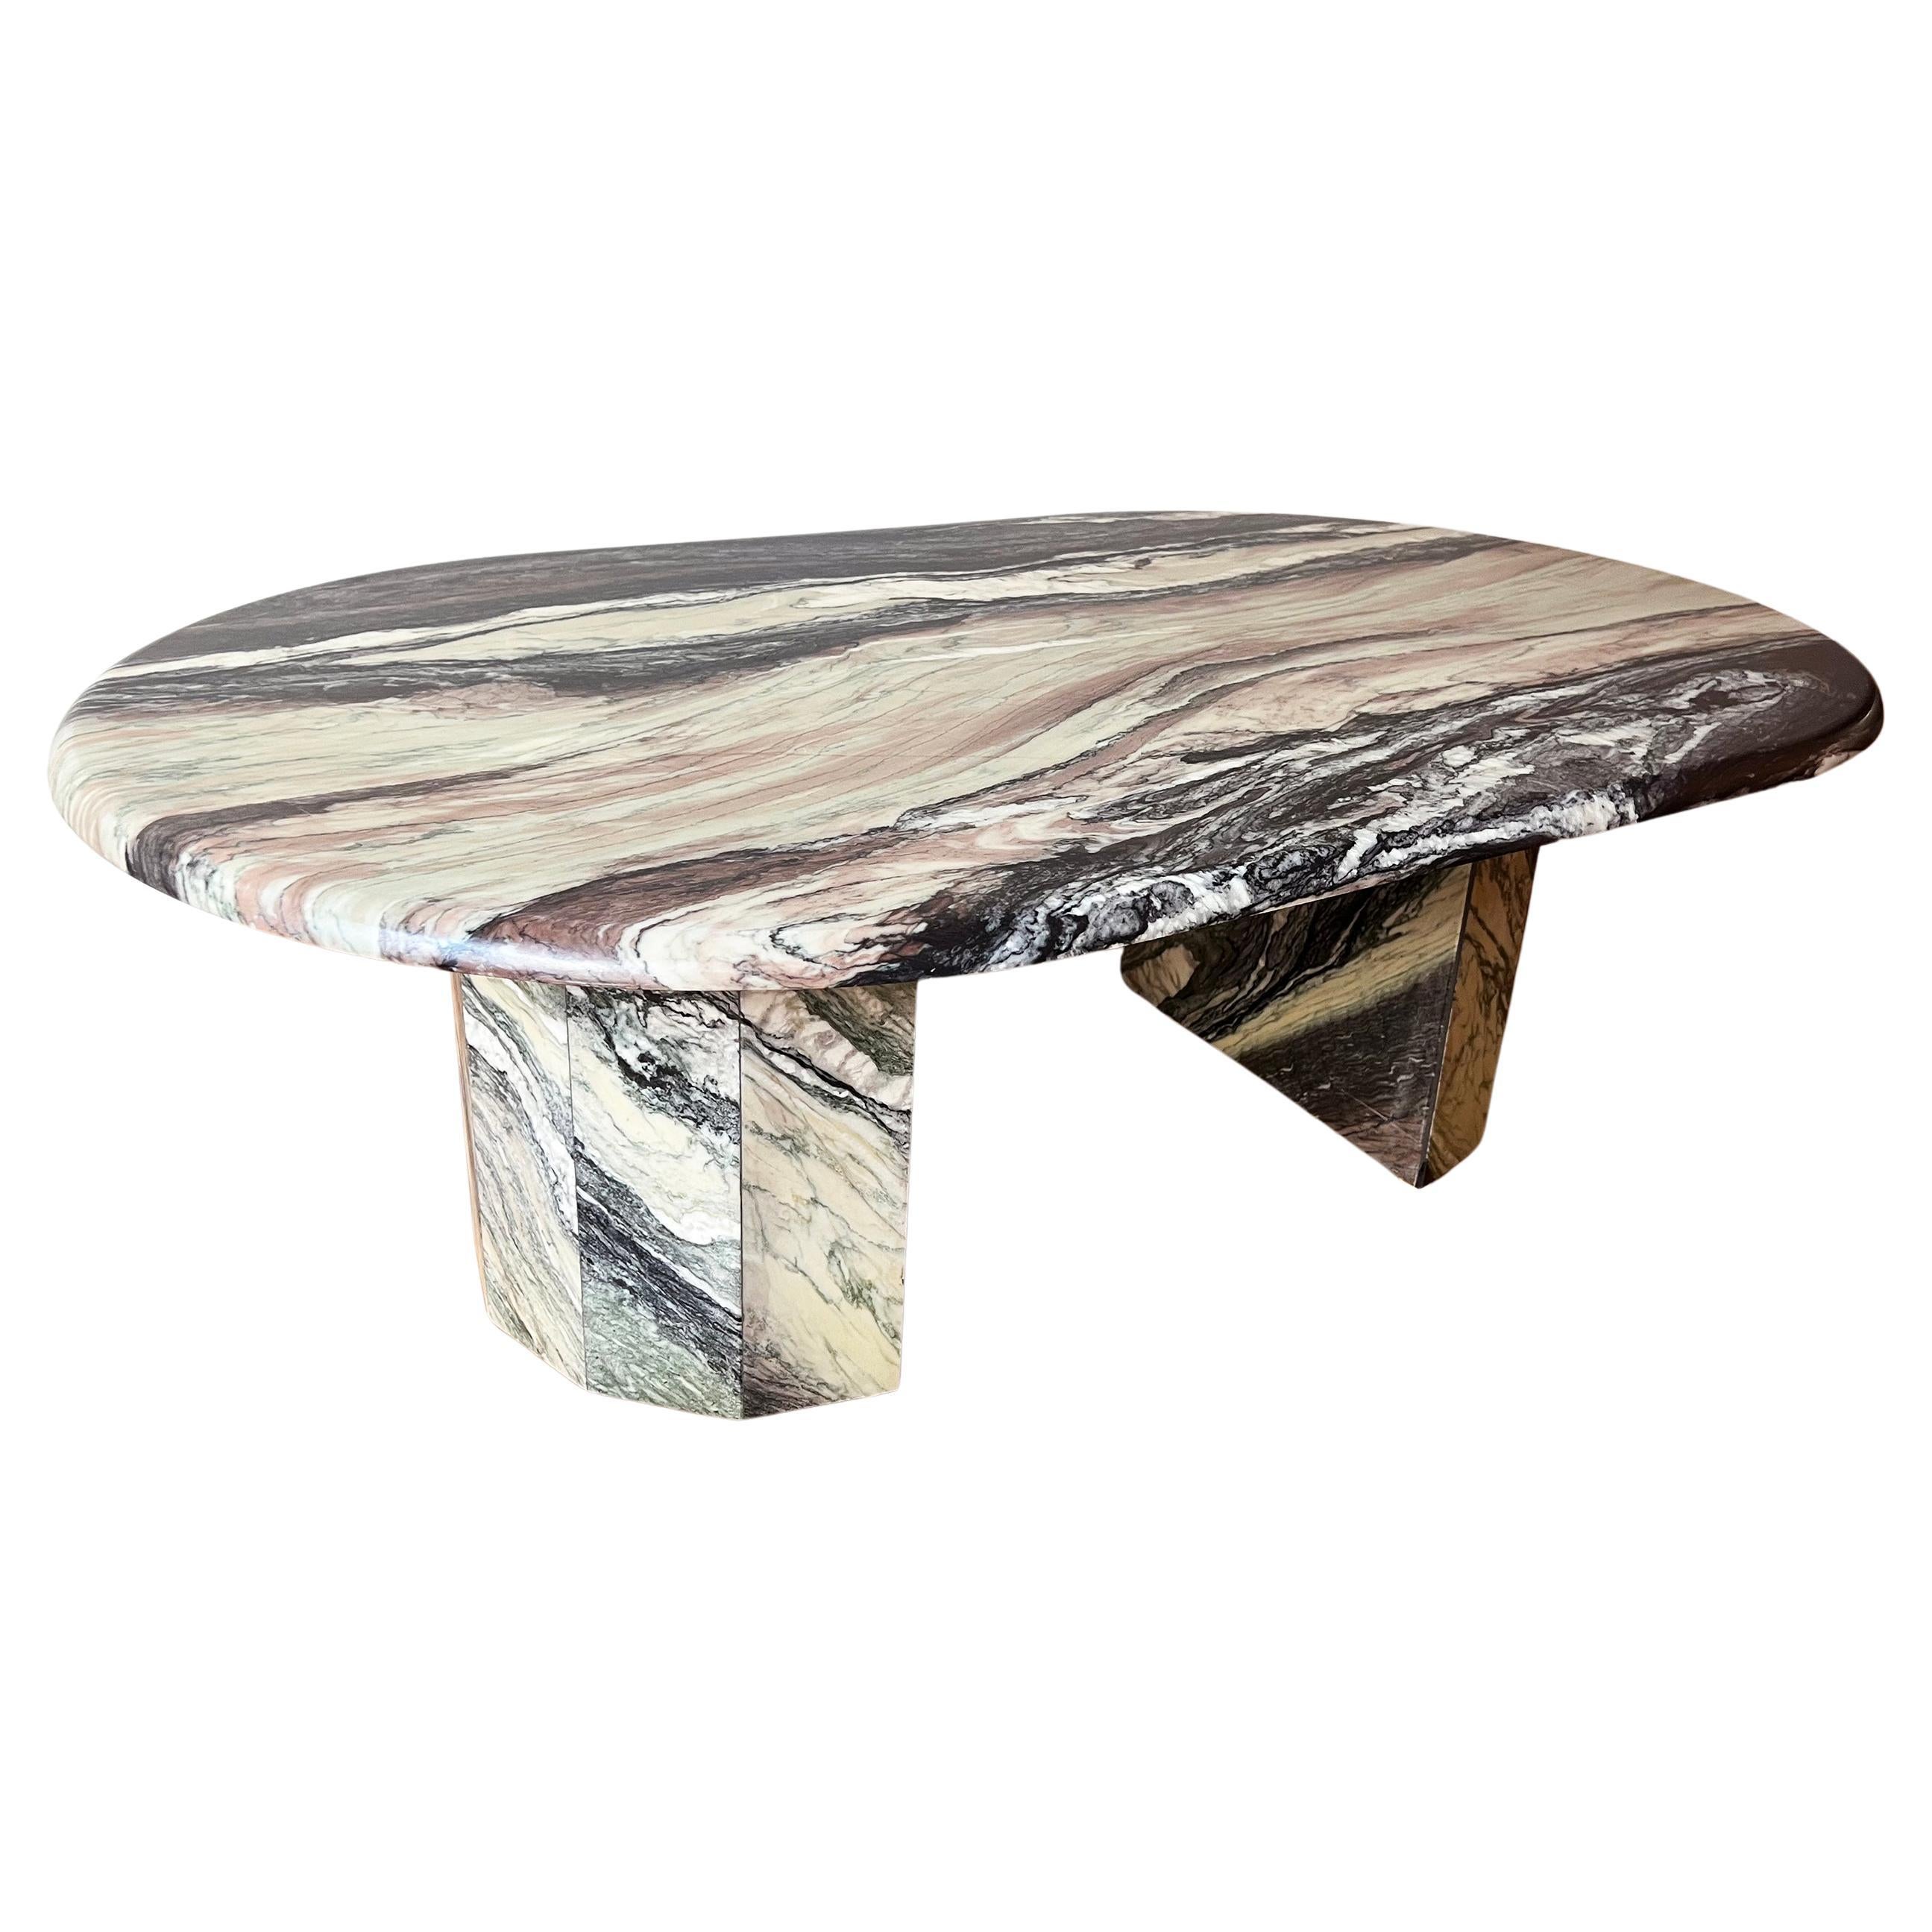 1970s Substantial White, Grey, Black, Pink Marble Coffee Table, sculptural Base